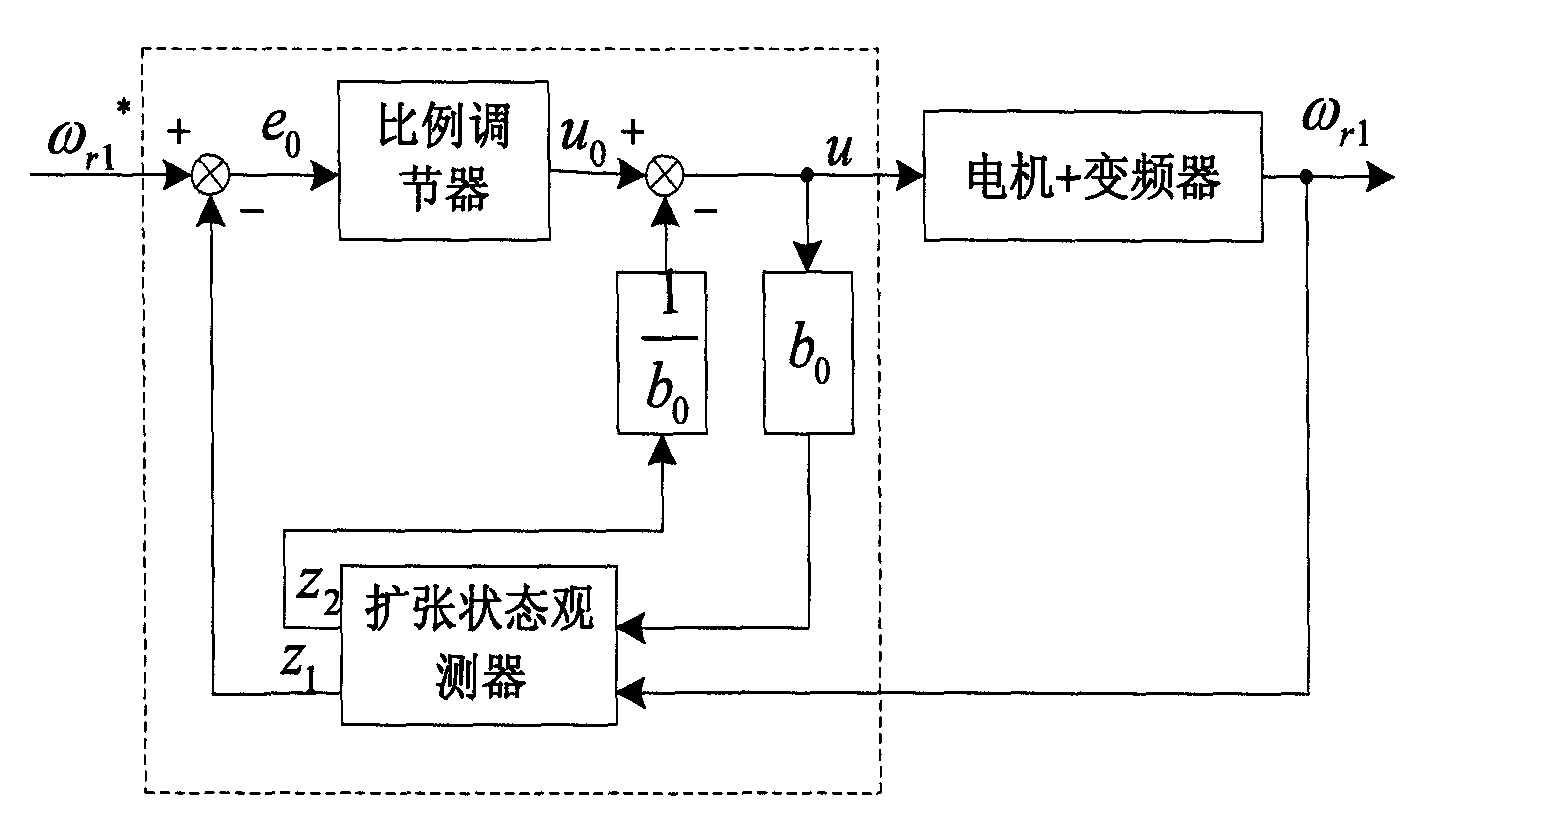 Construction method for automatic disturbance rejection controller of three-motor synchronous control system